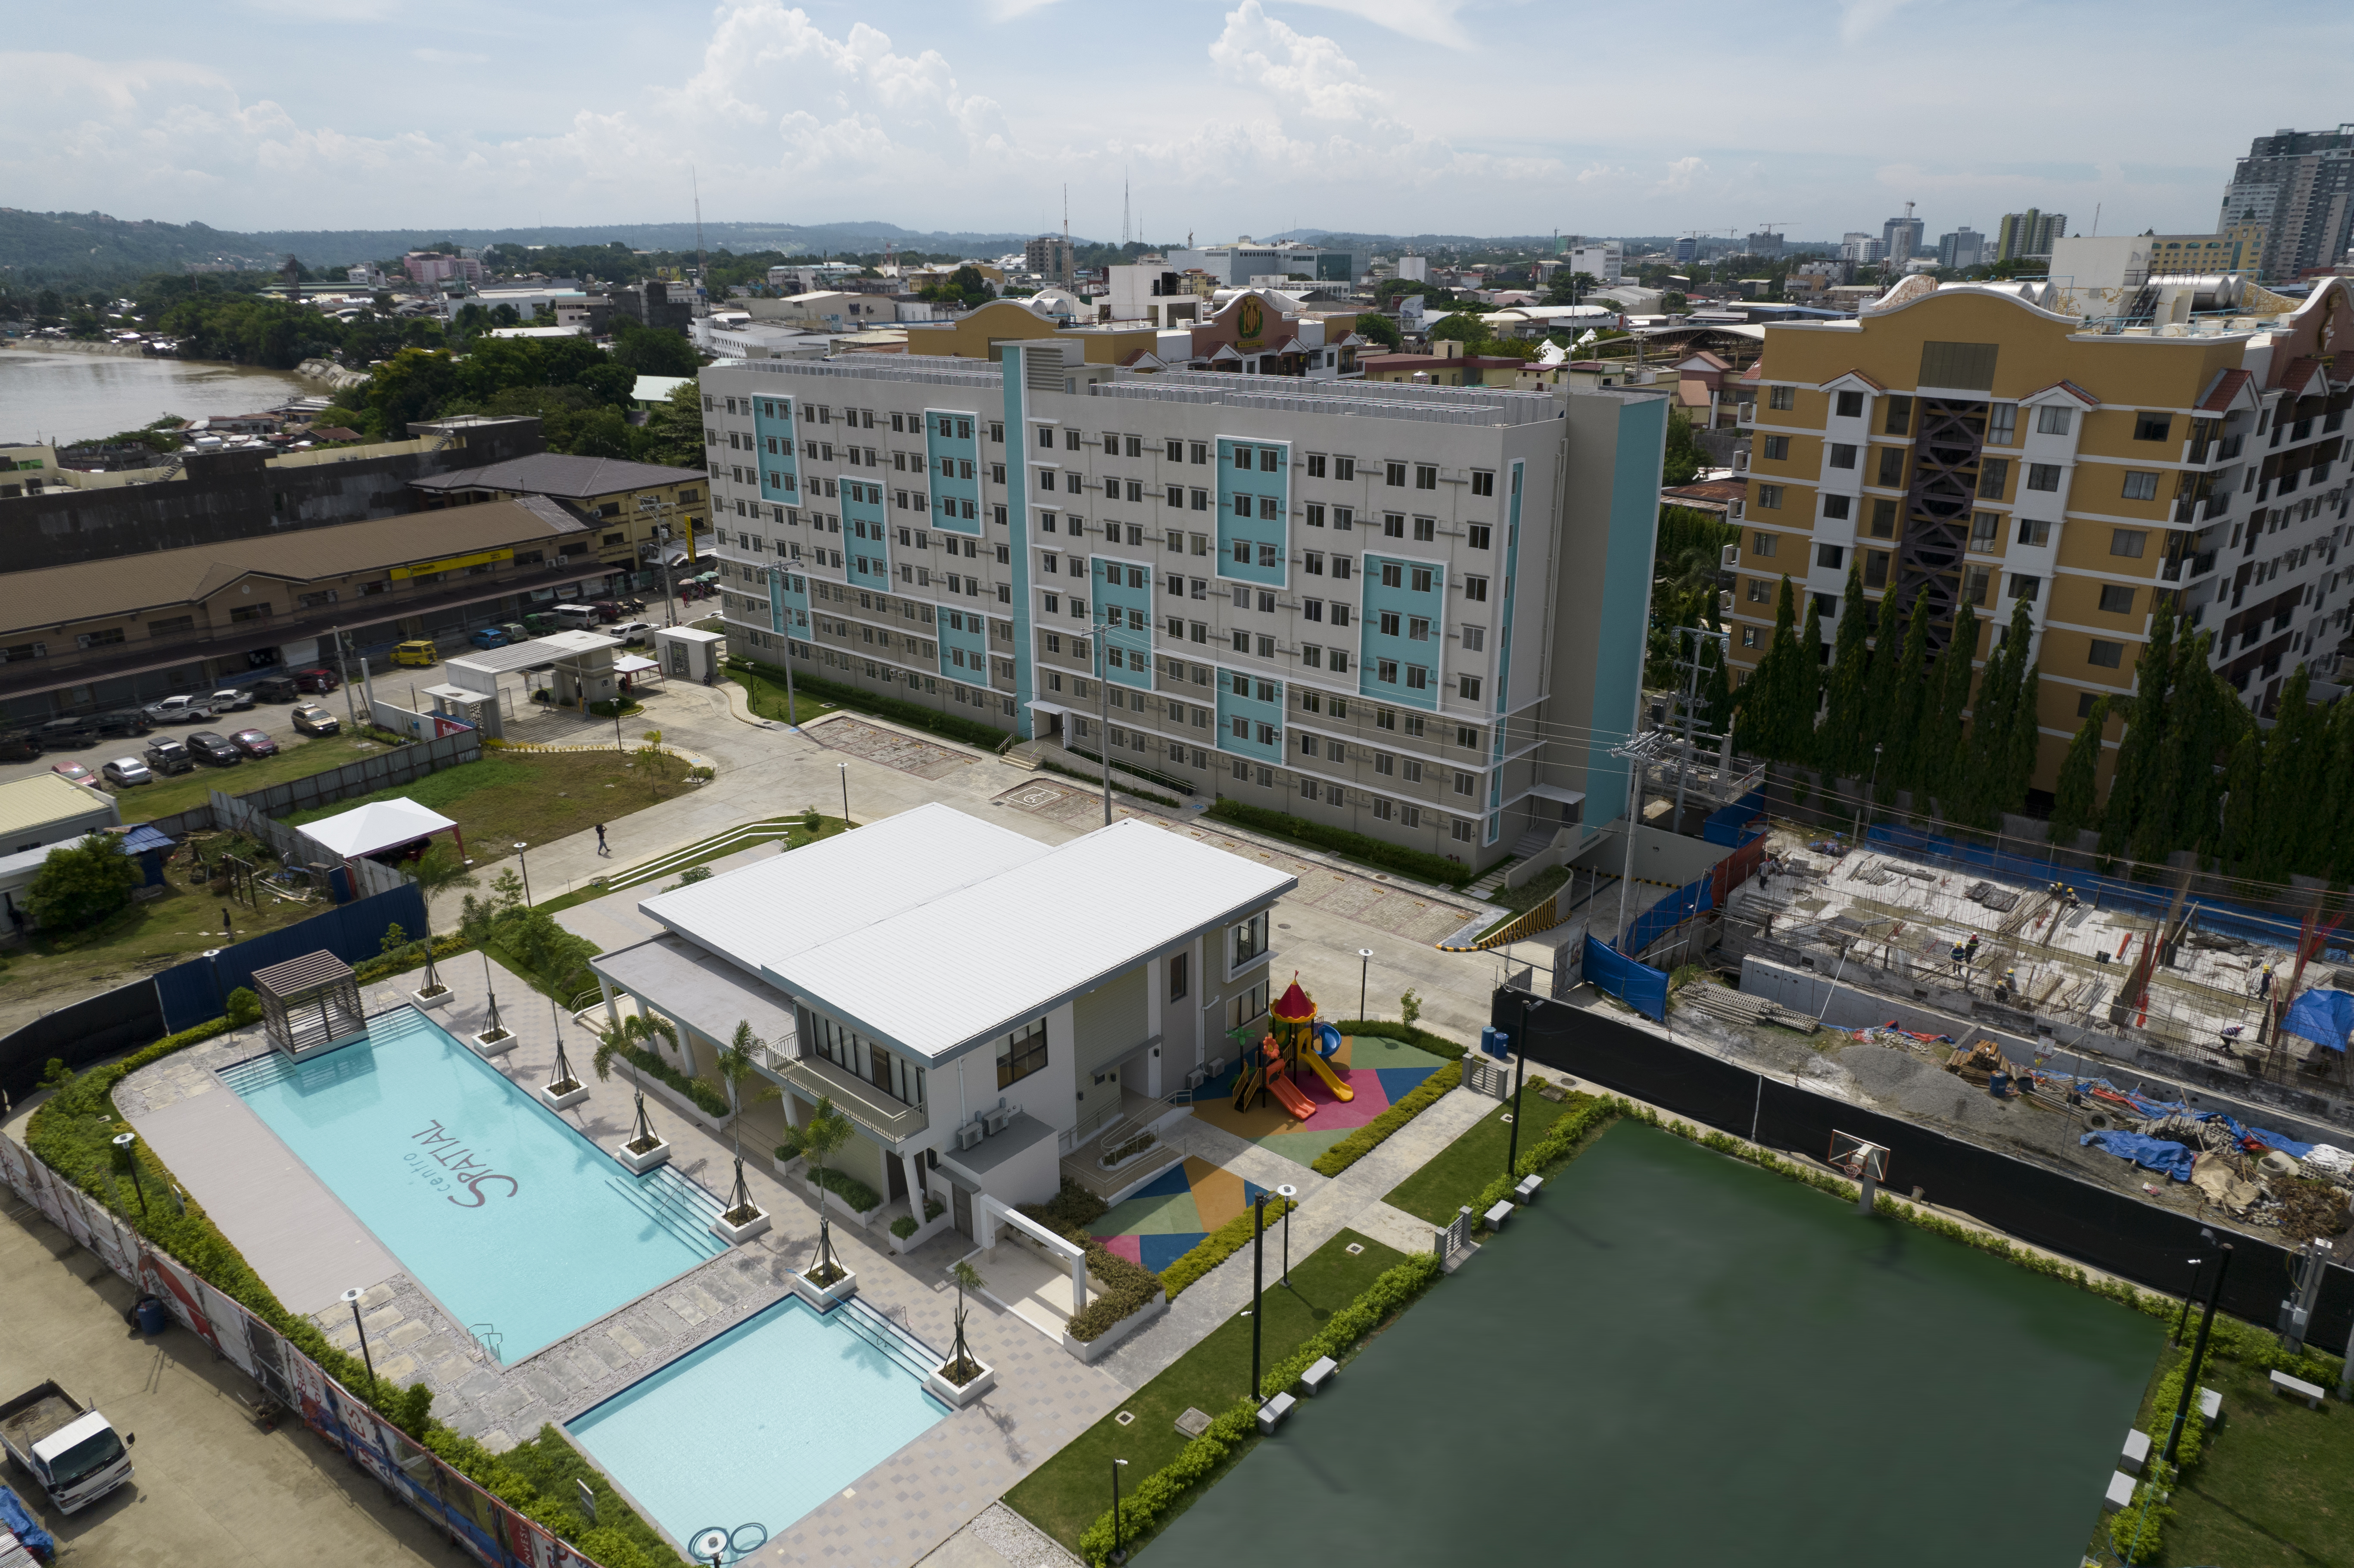 Filinvest Land on track to finish Centro Spatial Building Two in 2022